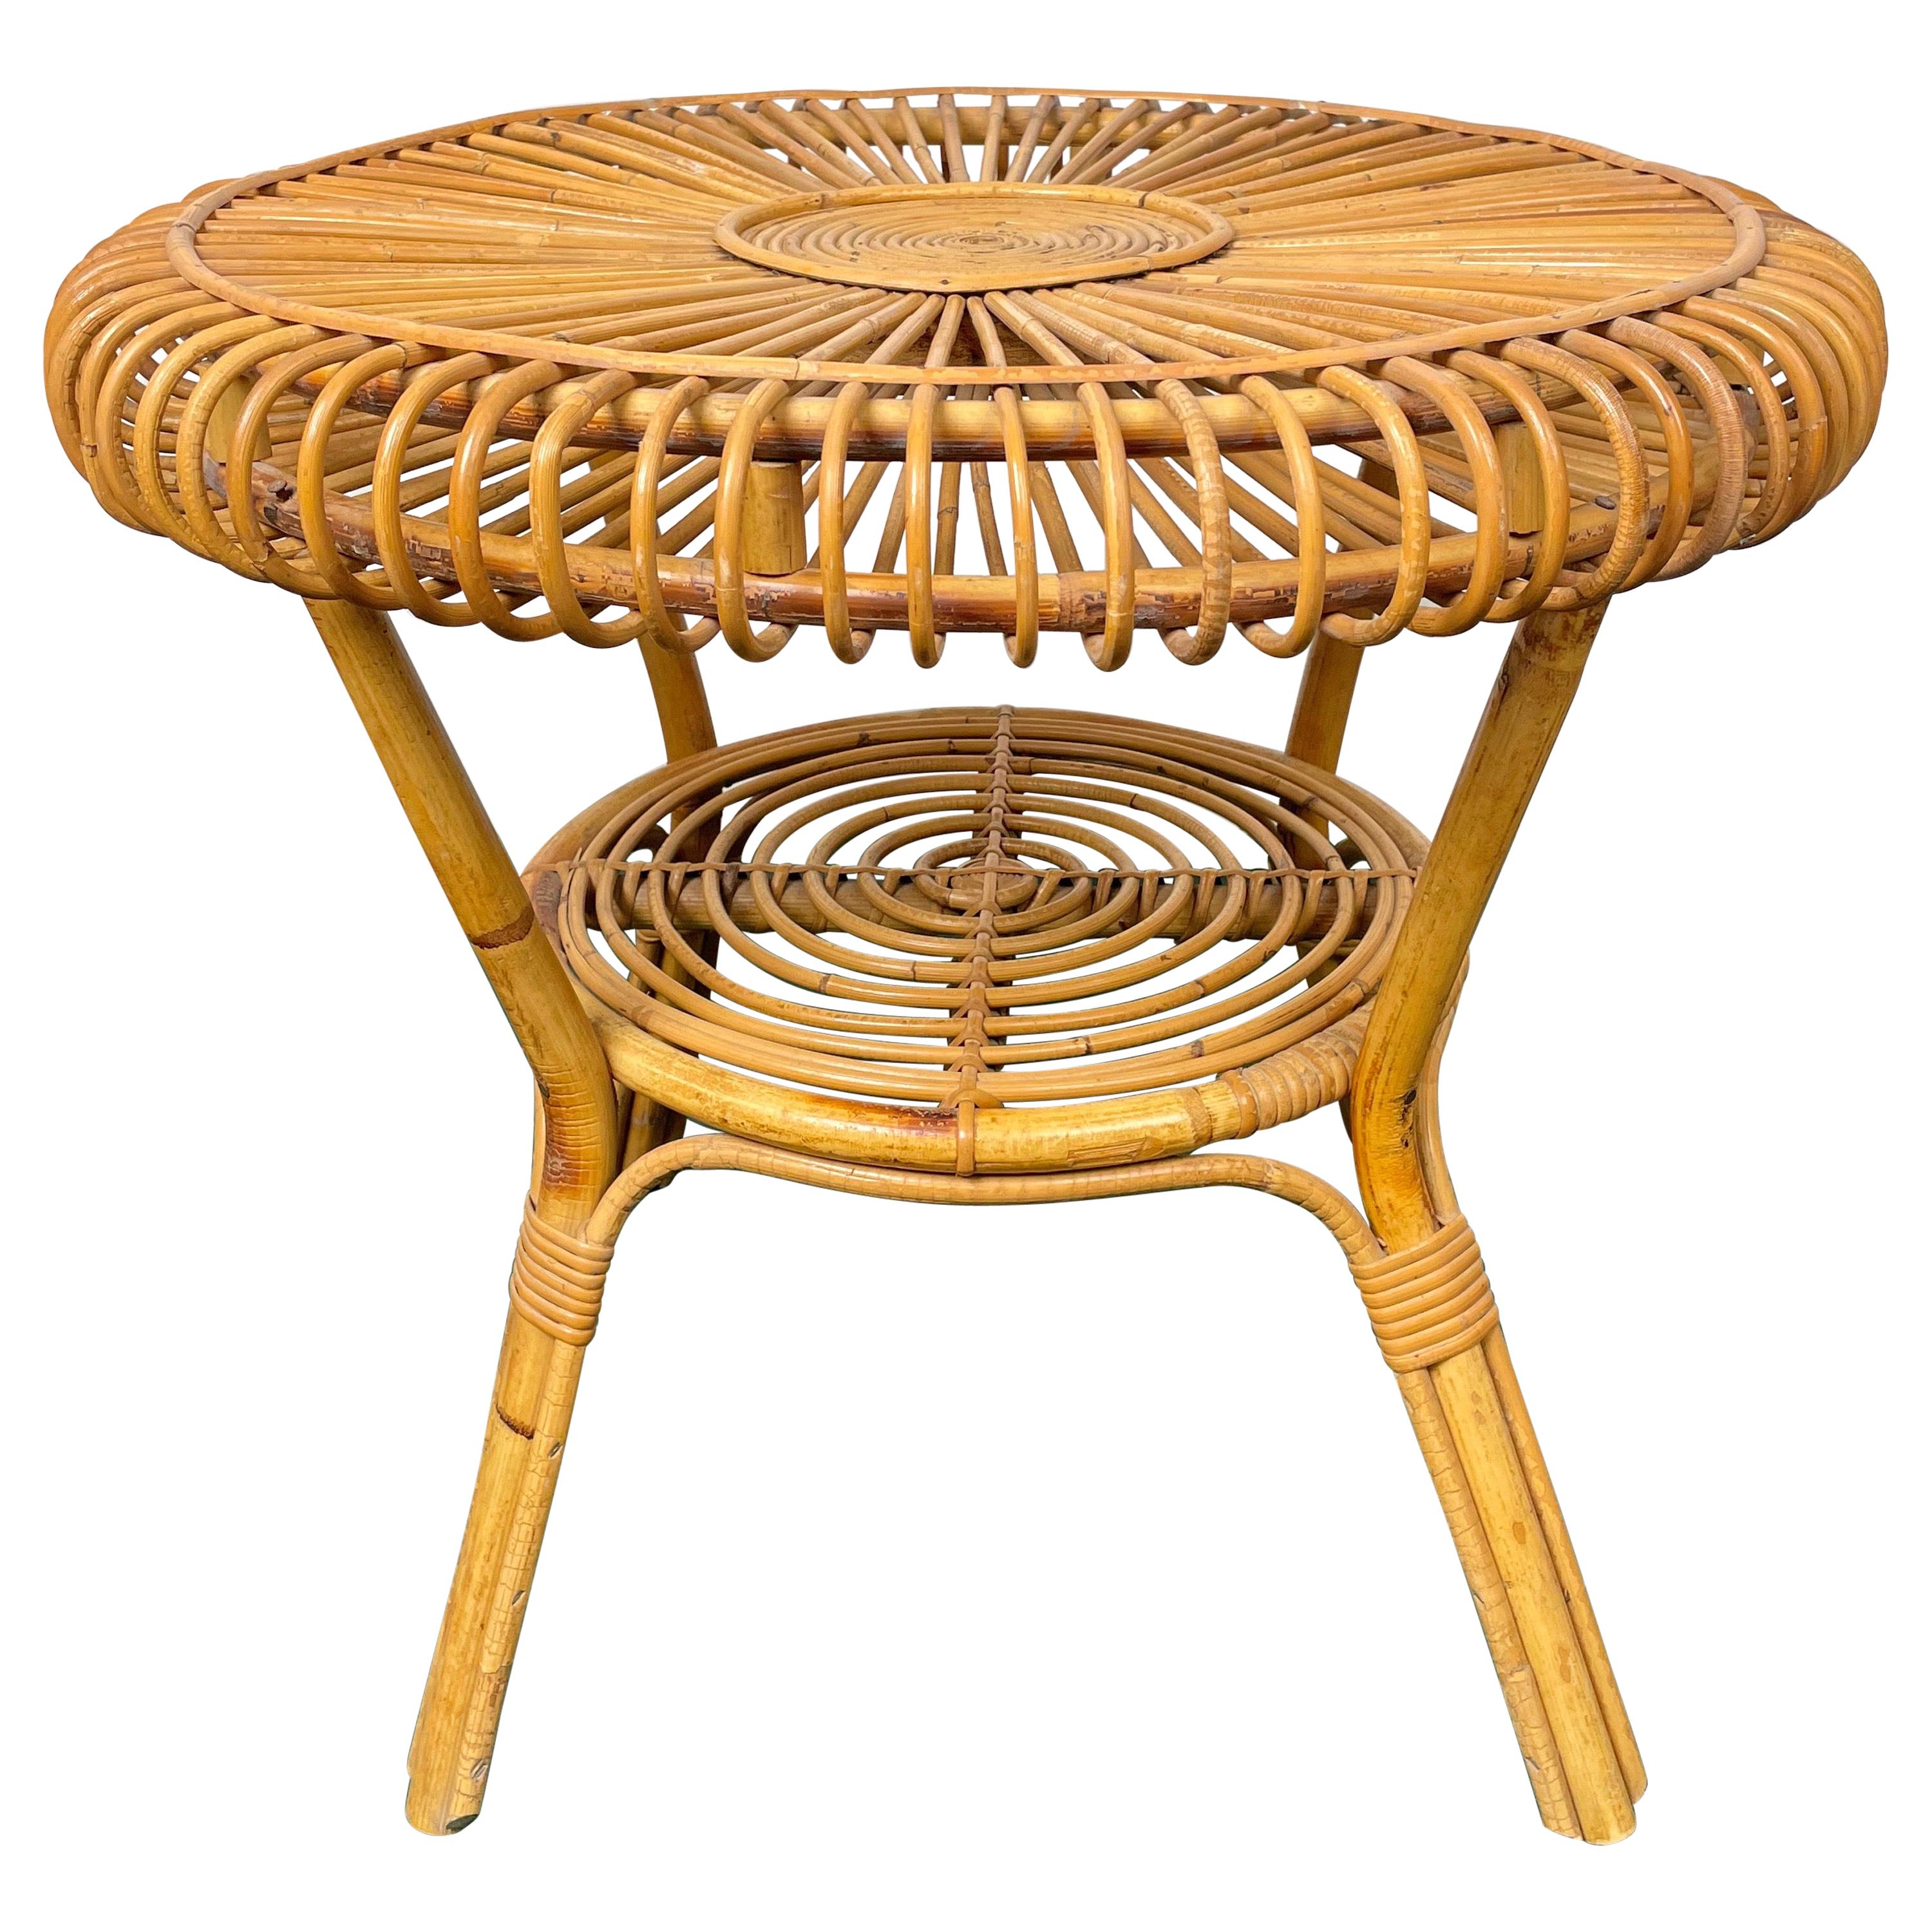 Midcentury Round Rattan and Bamboo Coffee Table, Italy, 1960s